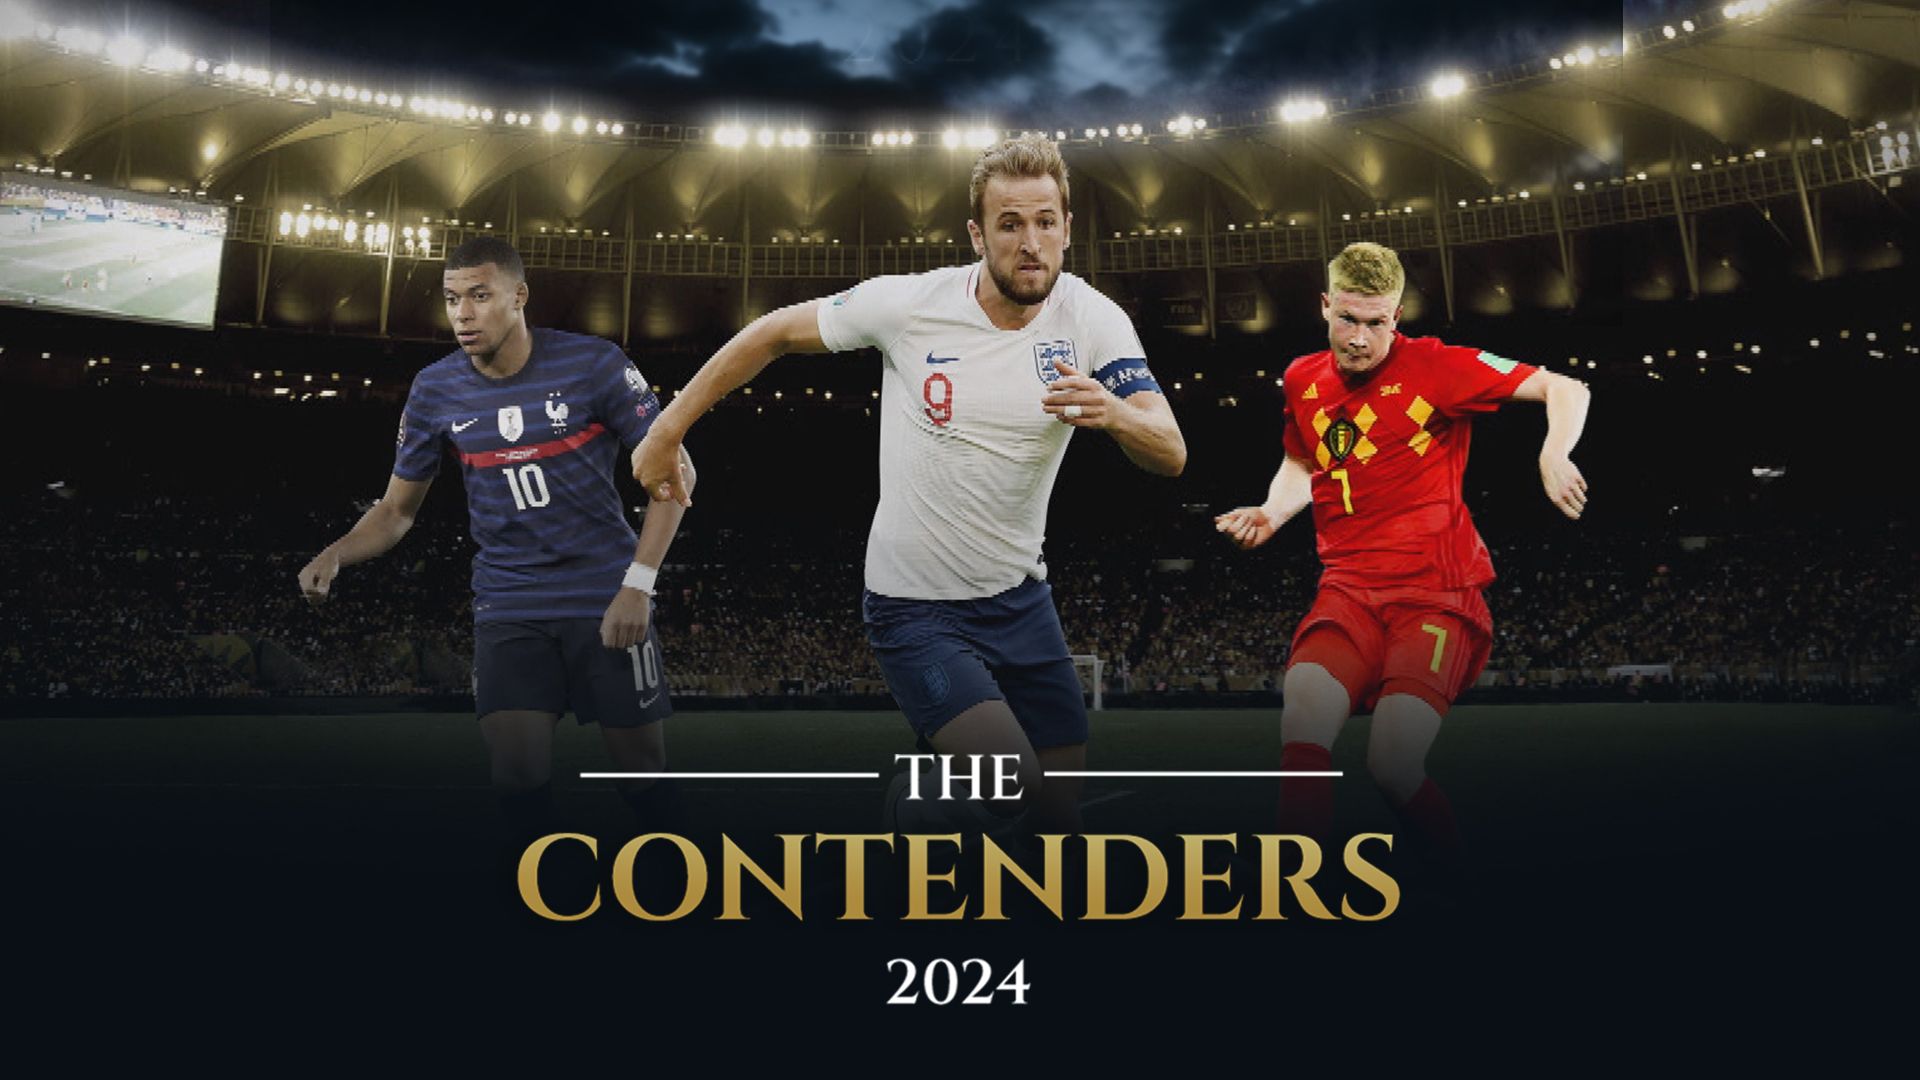 The Contenders 2024